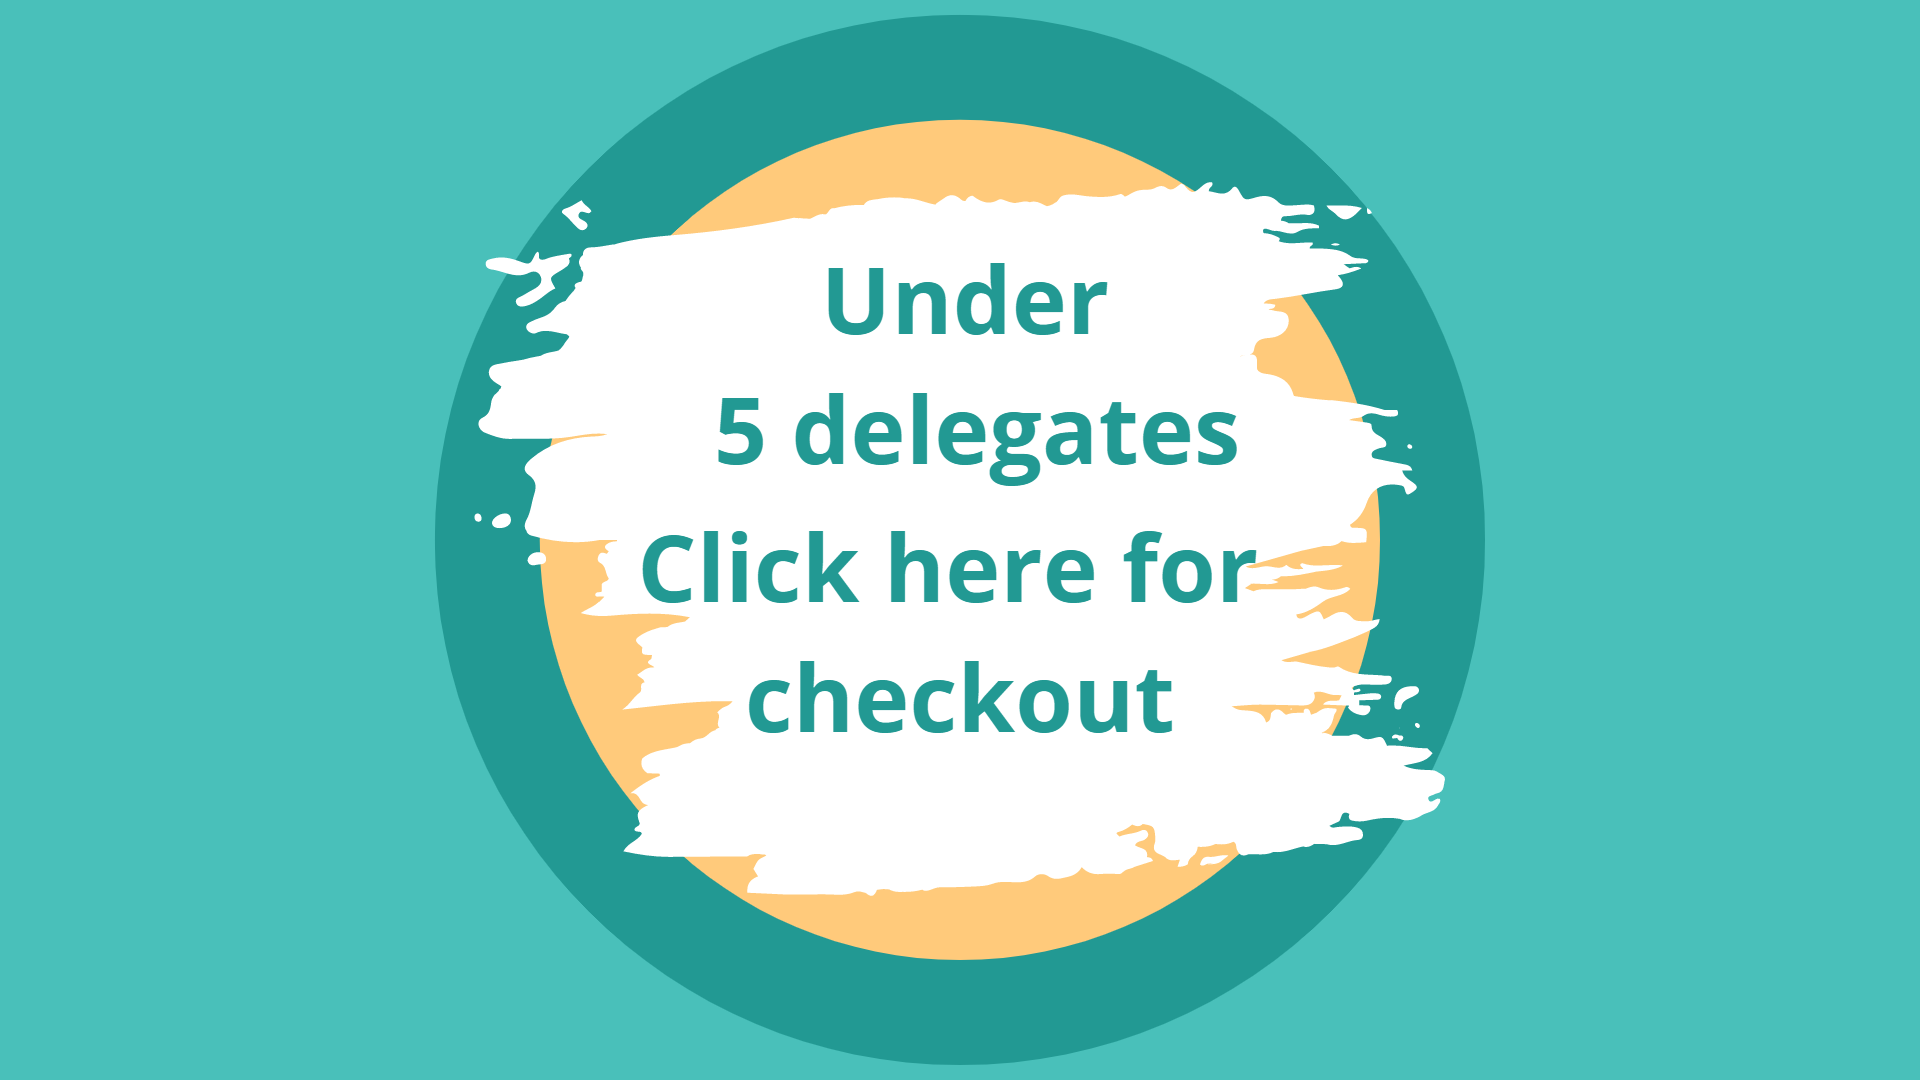 Booking MHFA England mental health first aid  for under 5 delegates go to checkout here. Takes you to Square payment site.